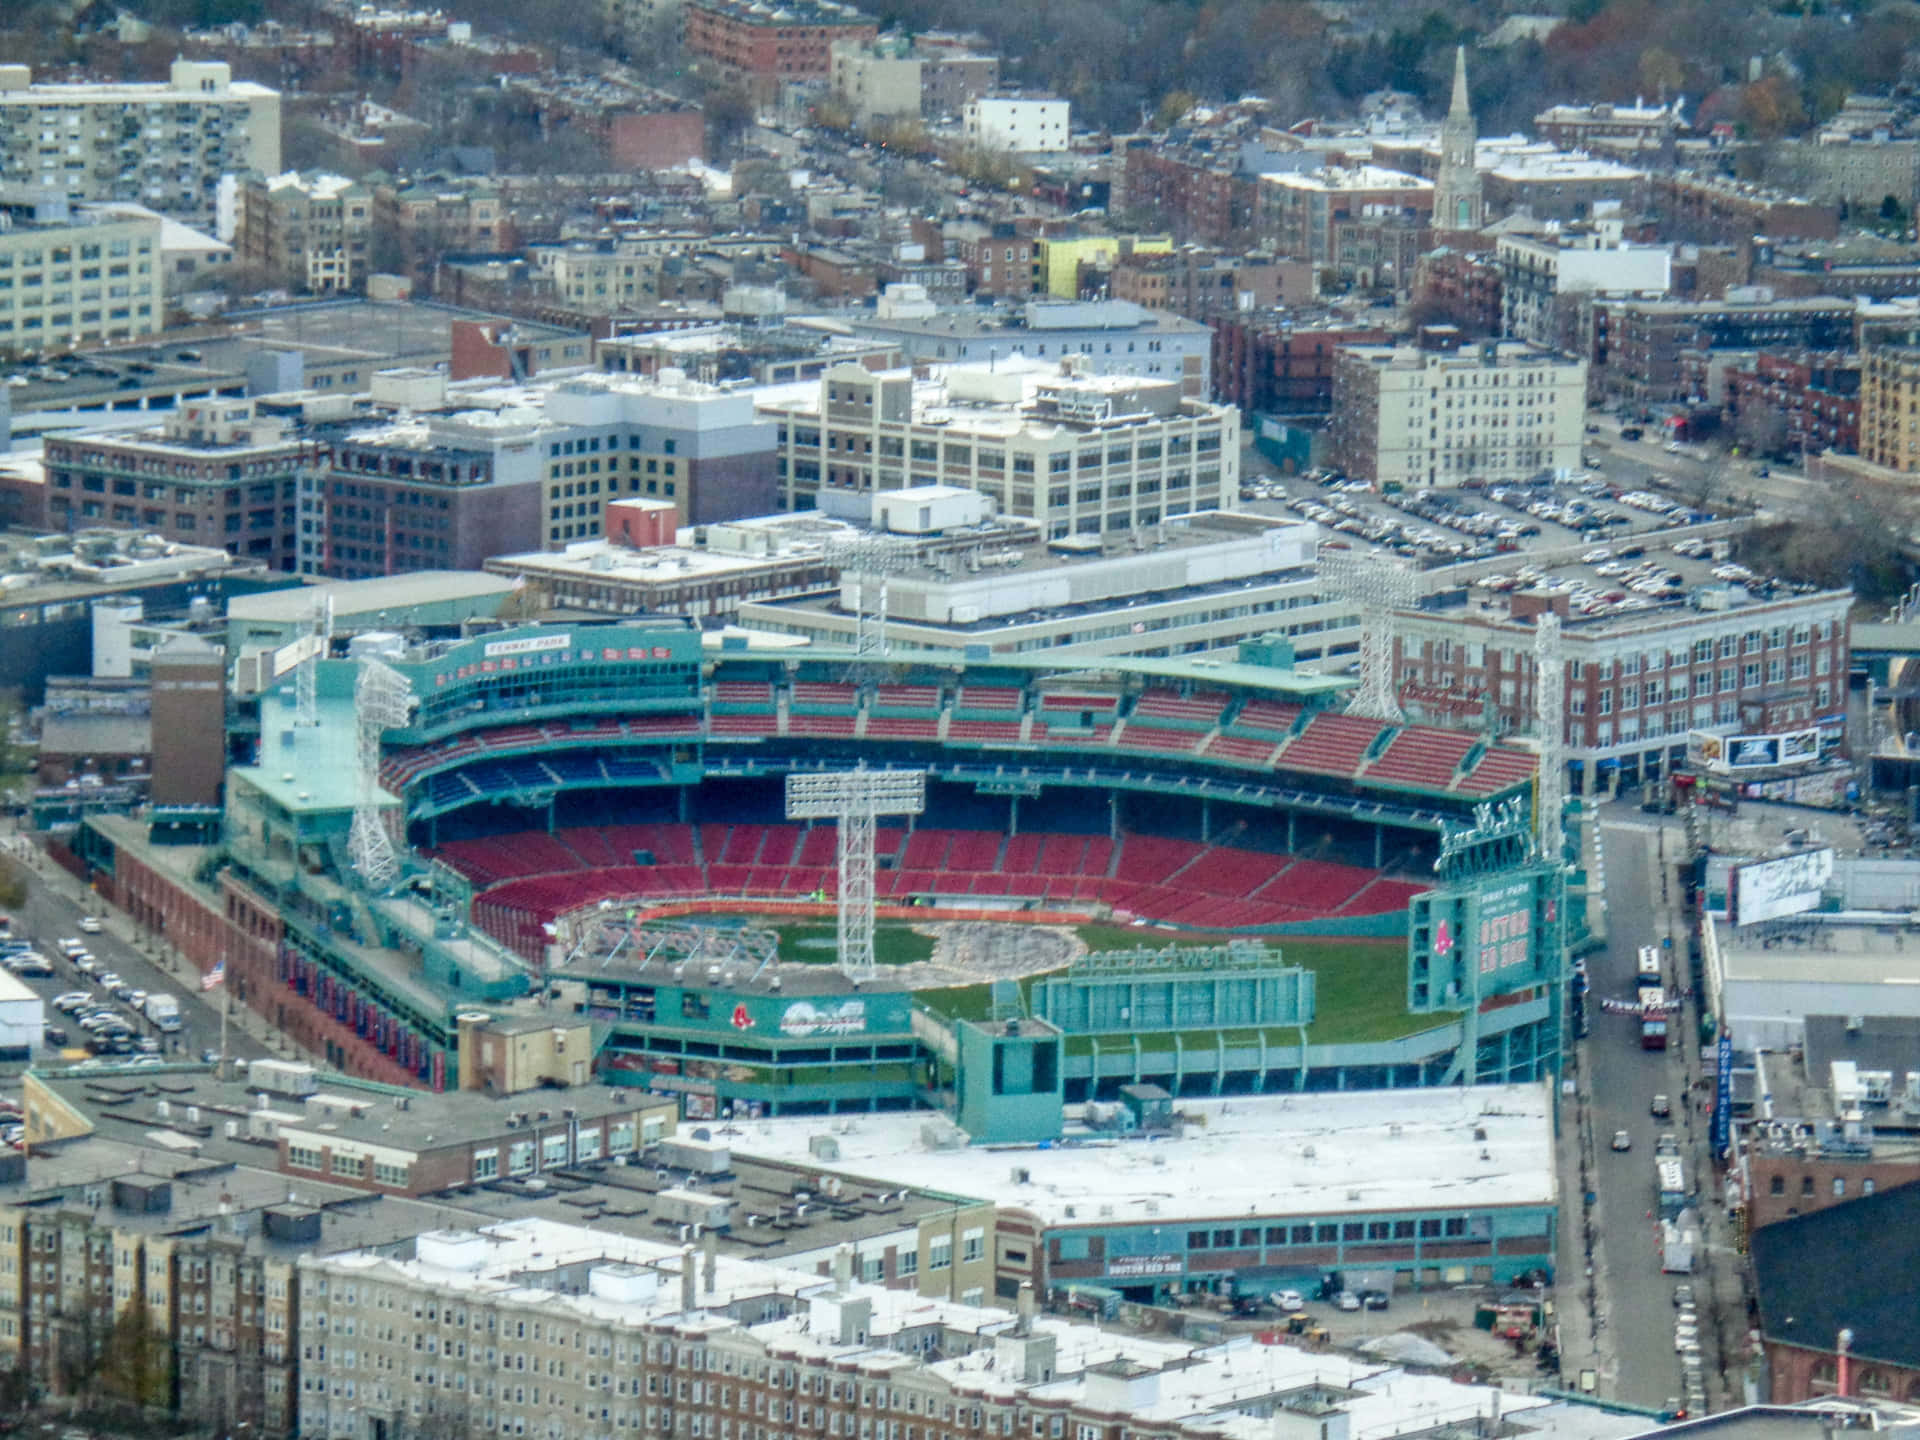 Enjoy a view of America's oldest ballpark - Fenway Park in 4K quality! Wallpaper